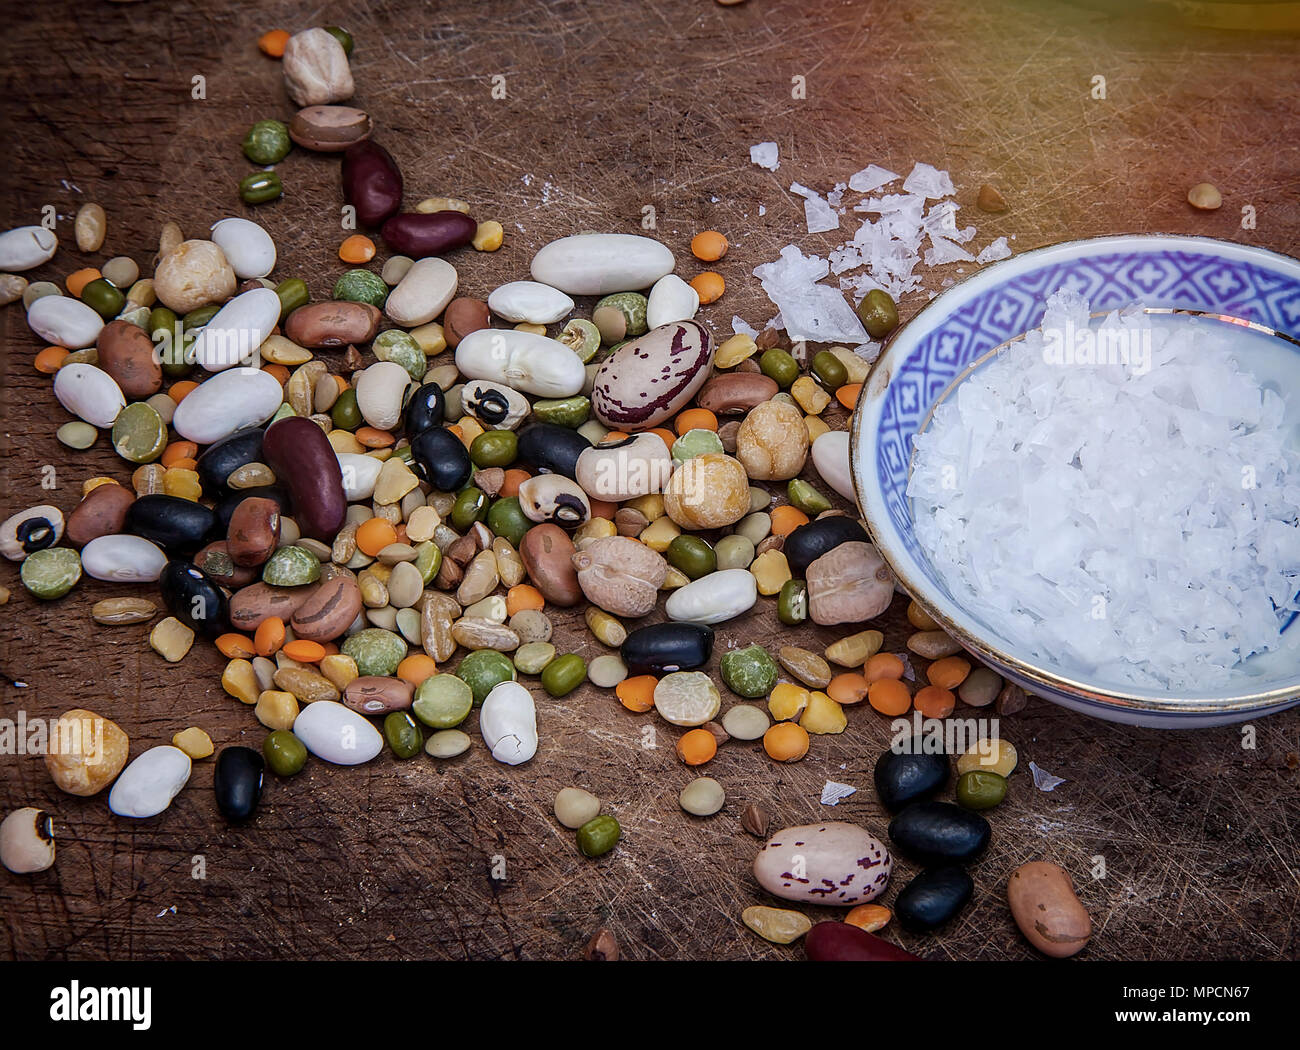 Colourful Dried Beans on a wooden surface with crystal salt. Isolated. Stock Image. Stock Photo